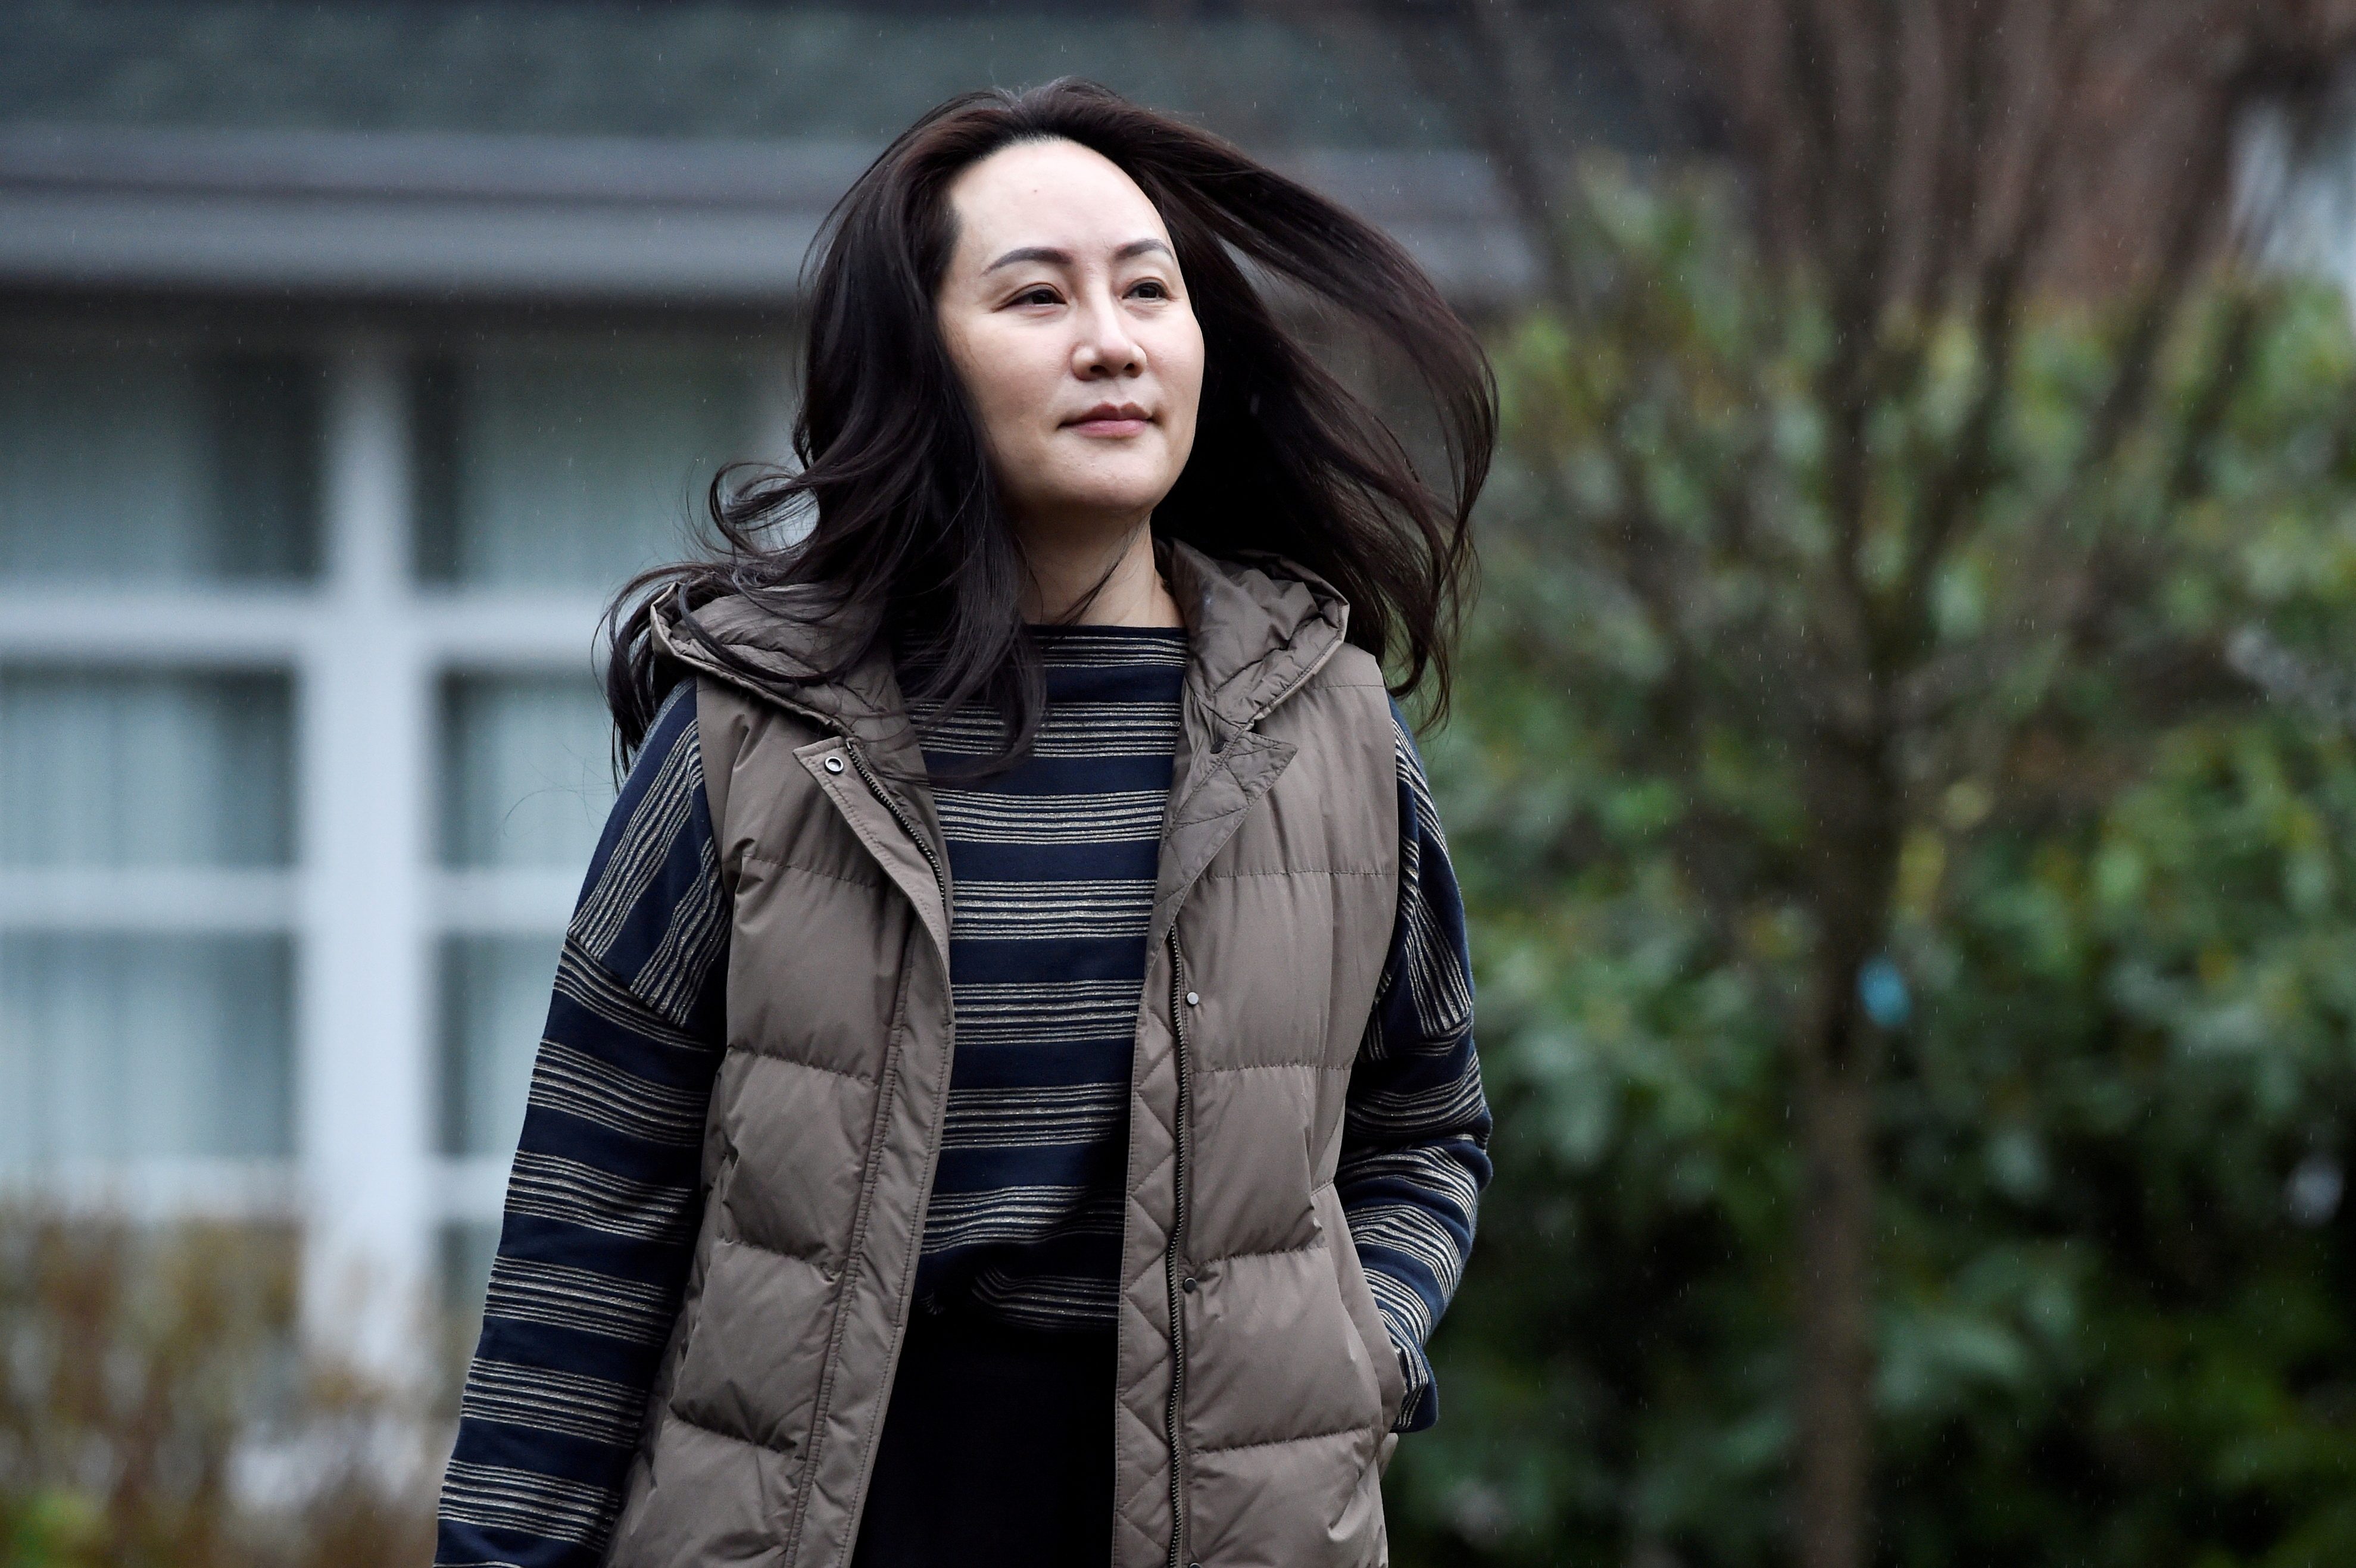 As Huawei CFO case enters final weeks, lawyer questions information in US extradition request